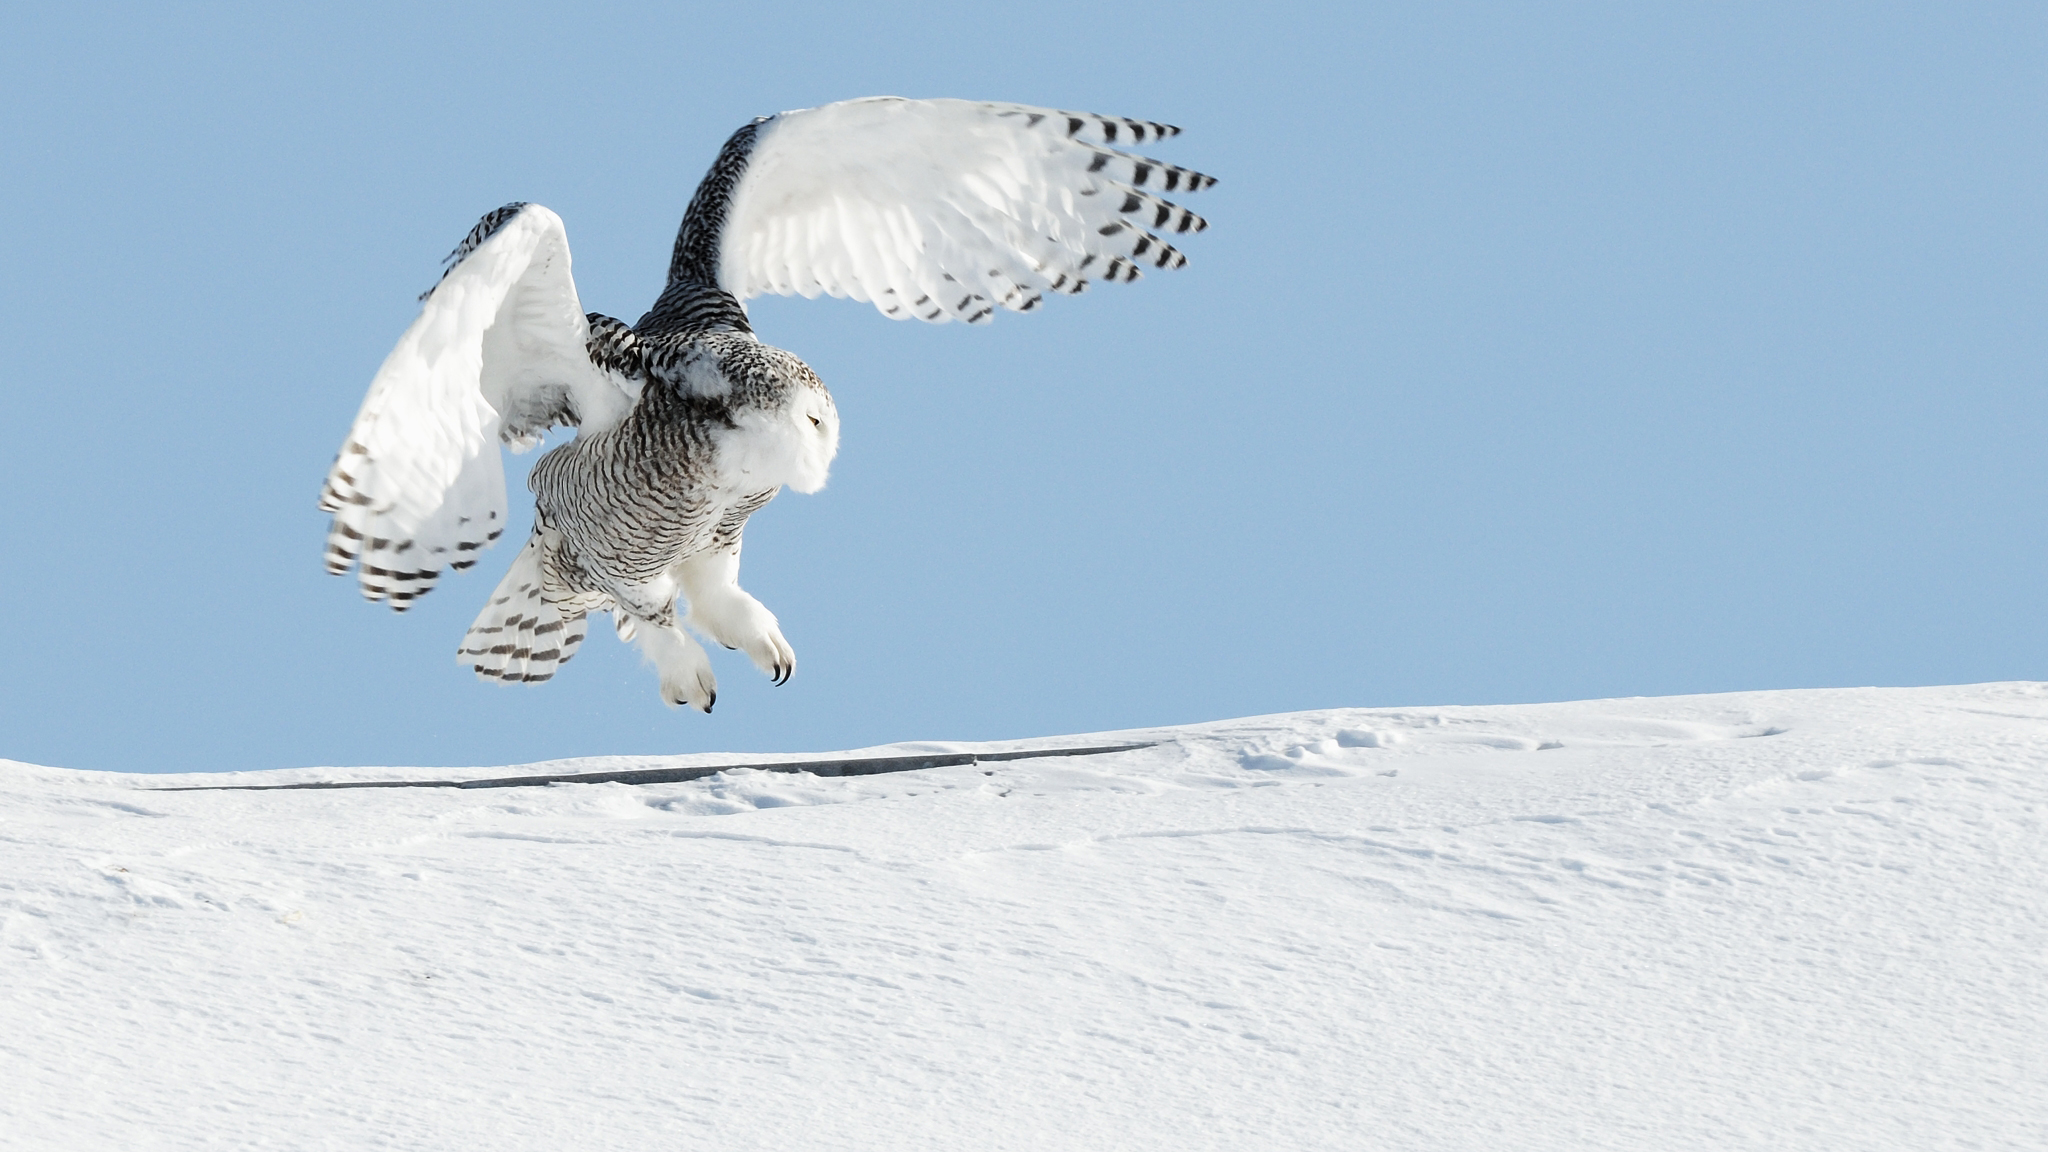 Snowy Owl (Bubo scandiacus) landing. By Bert de Tilly (Own work) [CC BY-SA 4.0 (http://creativecommons.org/licenses/by-sa/4.0)], via Wikimedia Commons